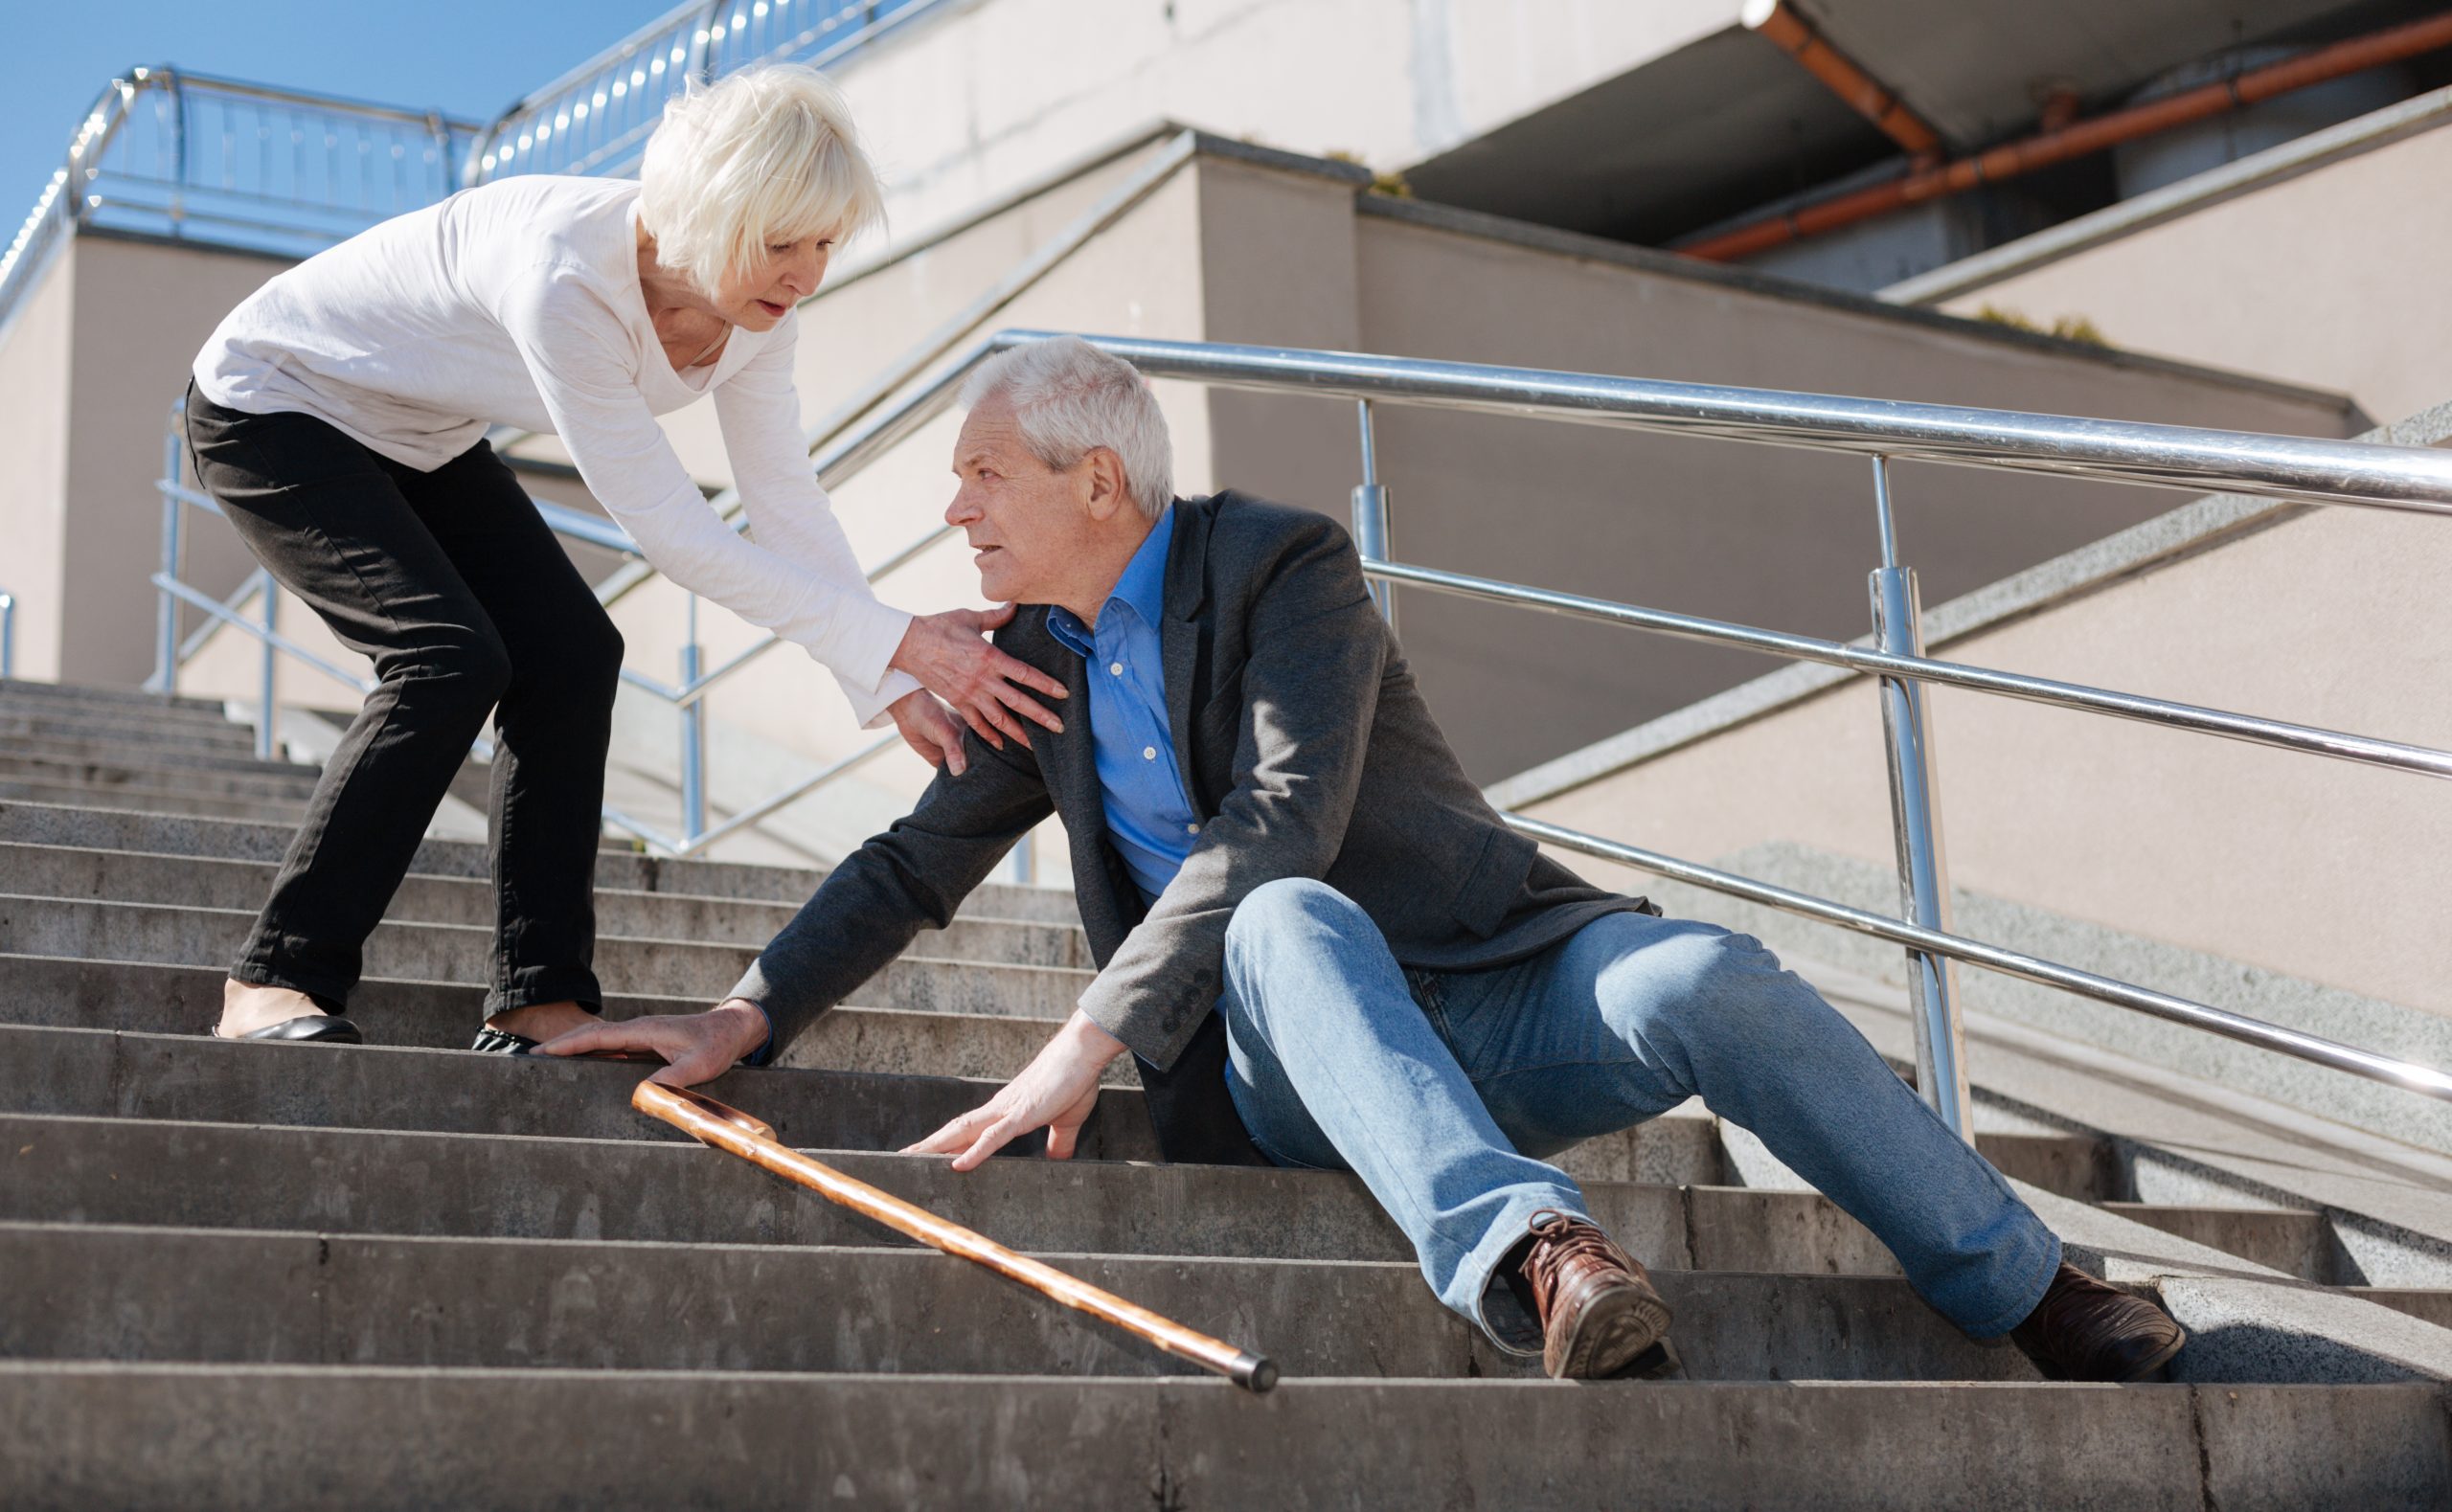 Slip and fall attorney in Houston